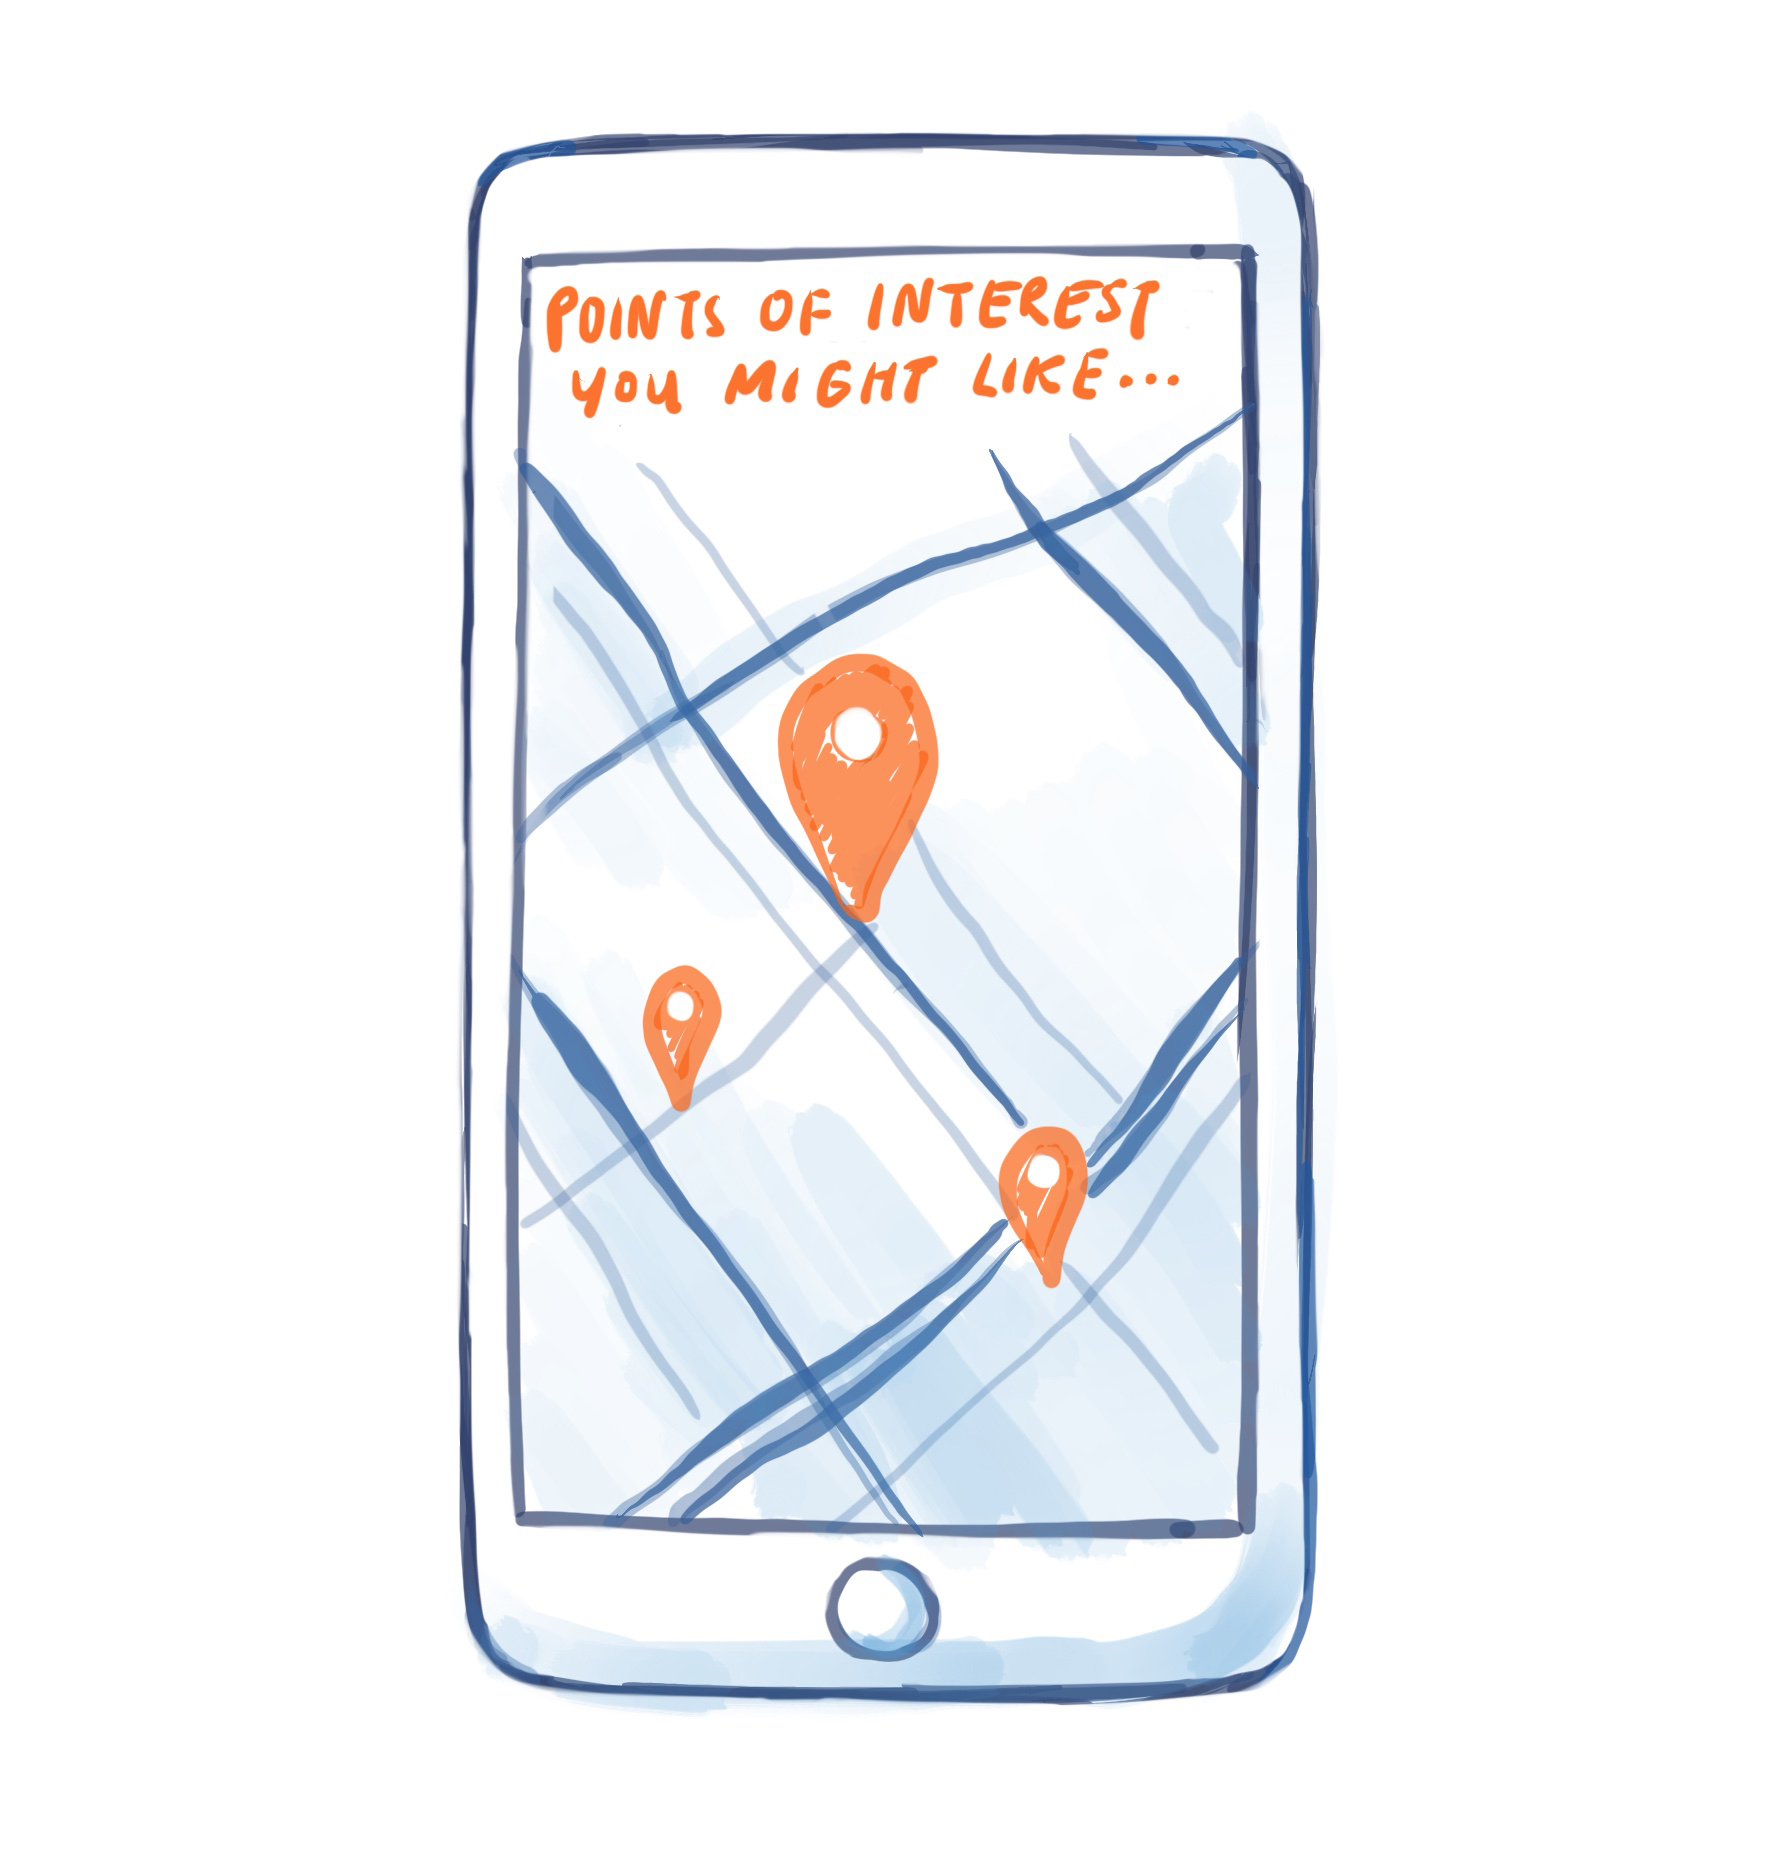 Opportunity space: physical location based personalization